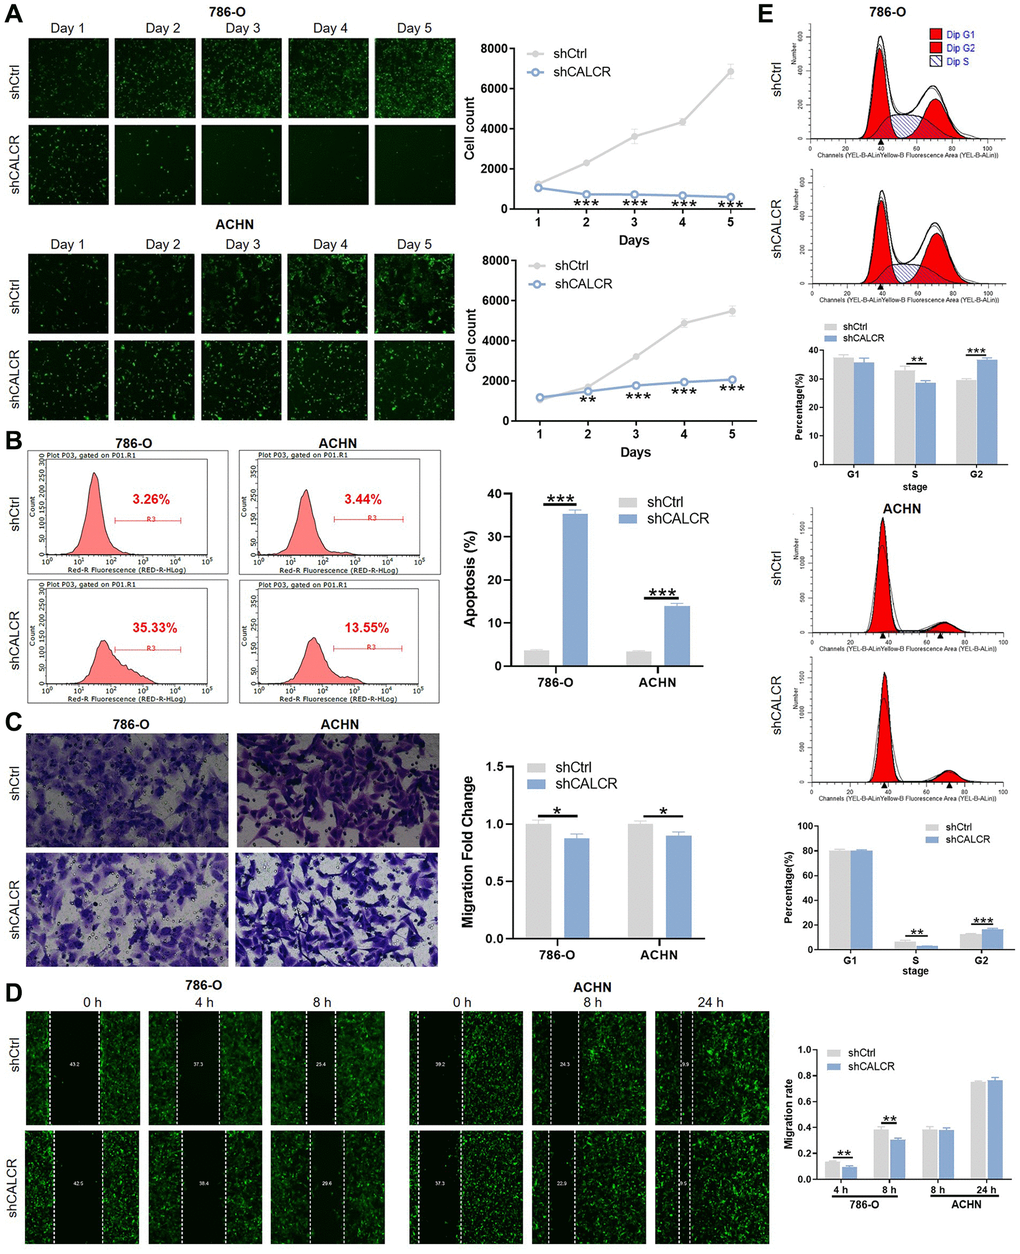 CALCR promotes malignant phenotypes of renal carcinoma cells. (A) Cell proliferative capacities of 786-O and ACHN cells transfected with shCtrl or shCALCR lentivirus were evaluated by Celigo cell count assay. (B) Alterations of cell apoptosis in 786-O and ACHN cells transfected with shCtrl or shCALCR lentivirus were analyzed by flow cytometry. (C, D) Cell migratory abilities of 786-O and ACHN cells transfected with shCtrl or shCALCR lentivirus were assessed by (C) transwell assay and (D) wound-healing assay. (E) The effect of CALCR on cell cycle distribution was analyzed by flow cytometry. The representative images were selected from at least 3 independent experiments. Results were presented as mean ± SD. *p **p ***p 